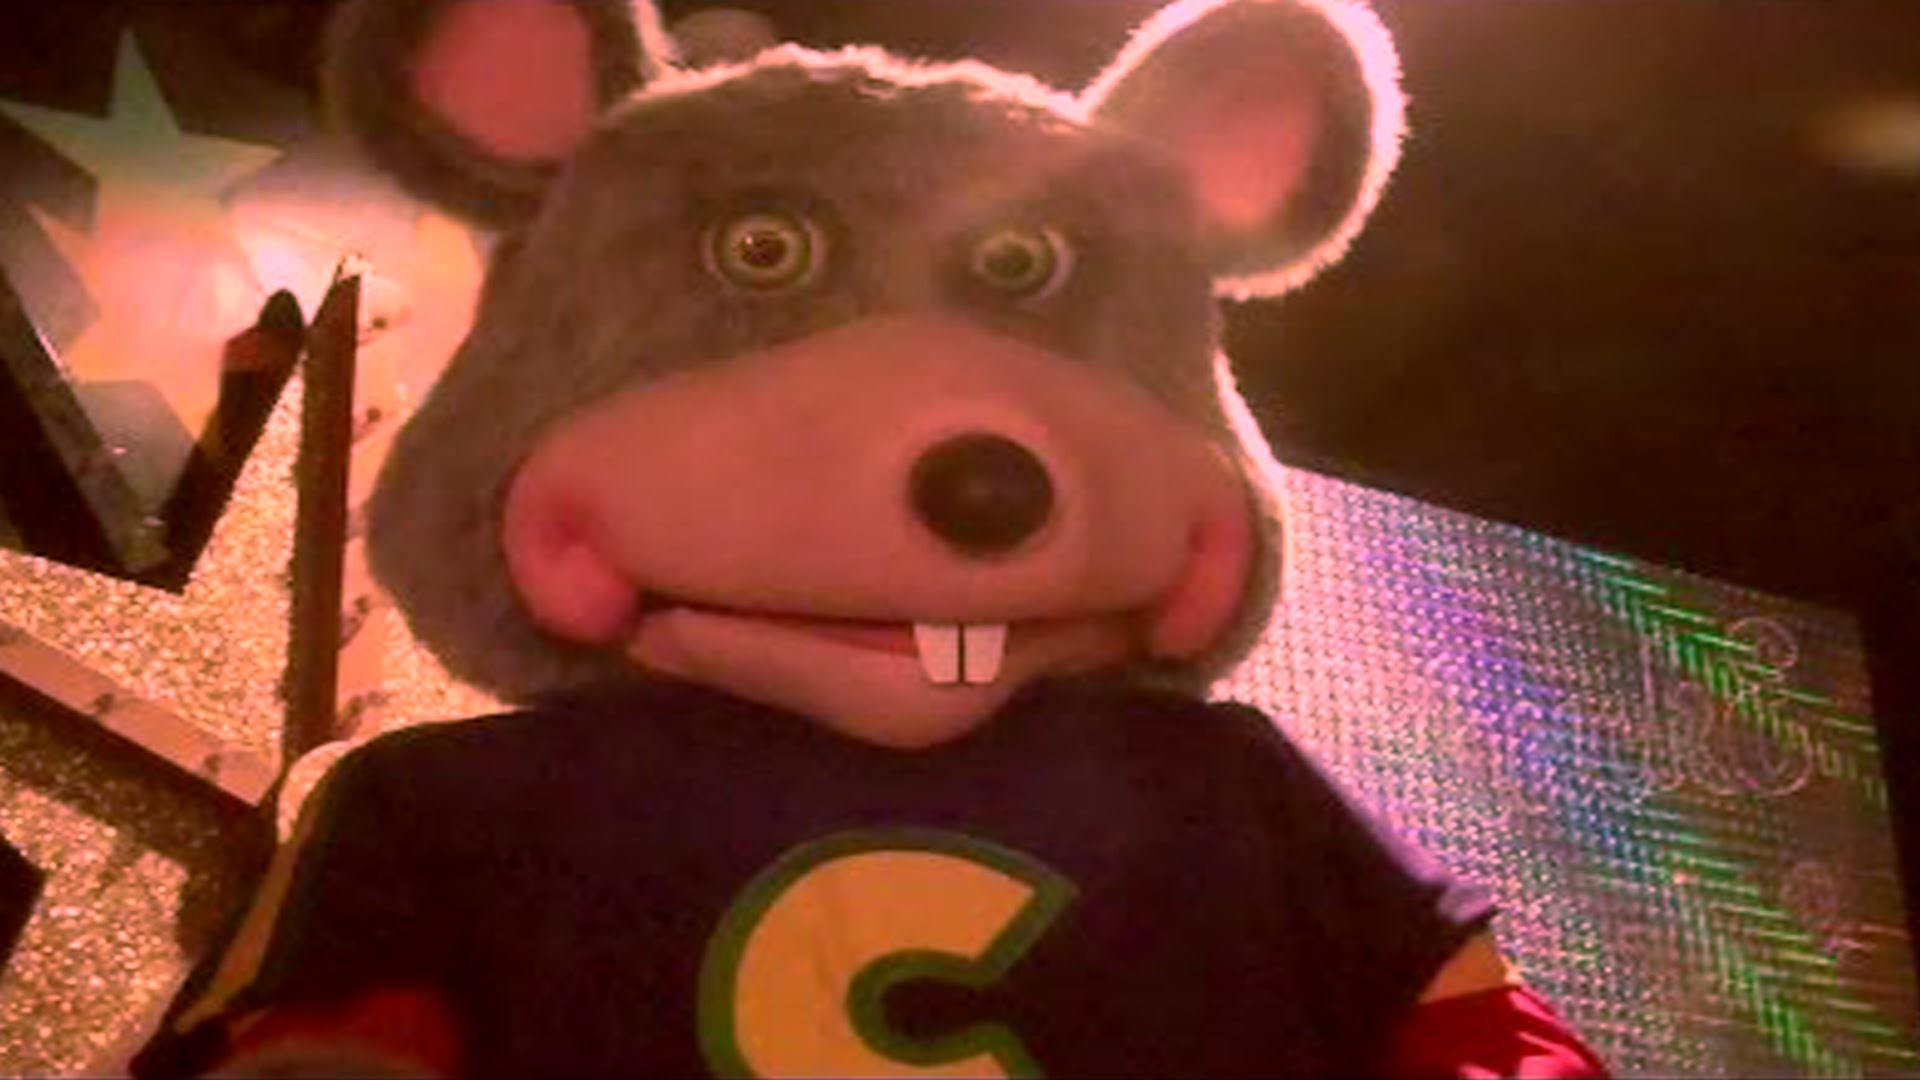 Today we gon' learn about Chuck E Cheese